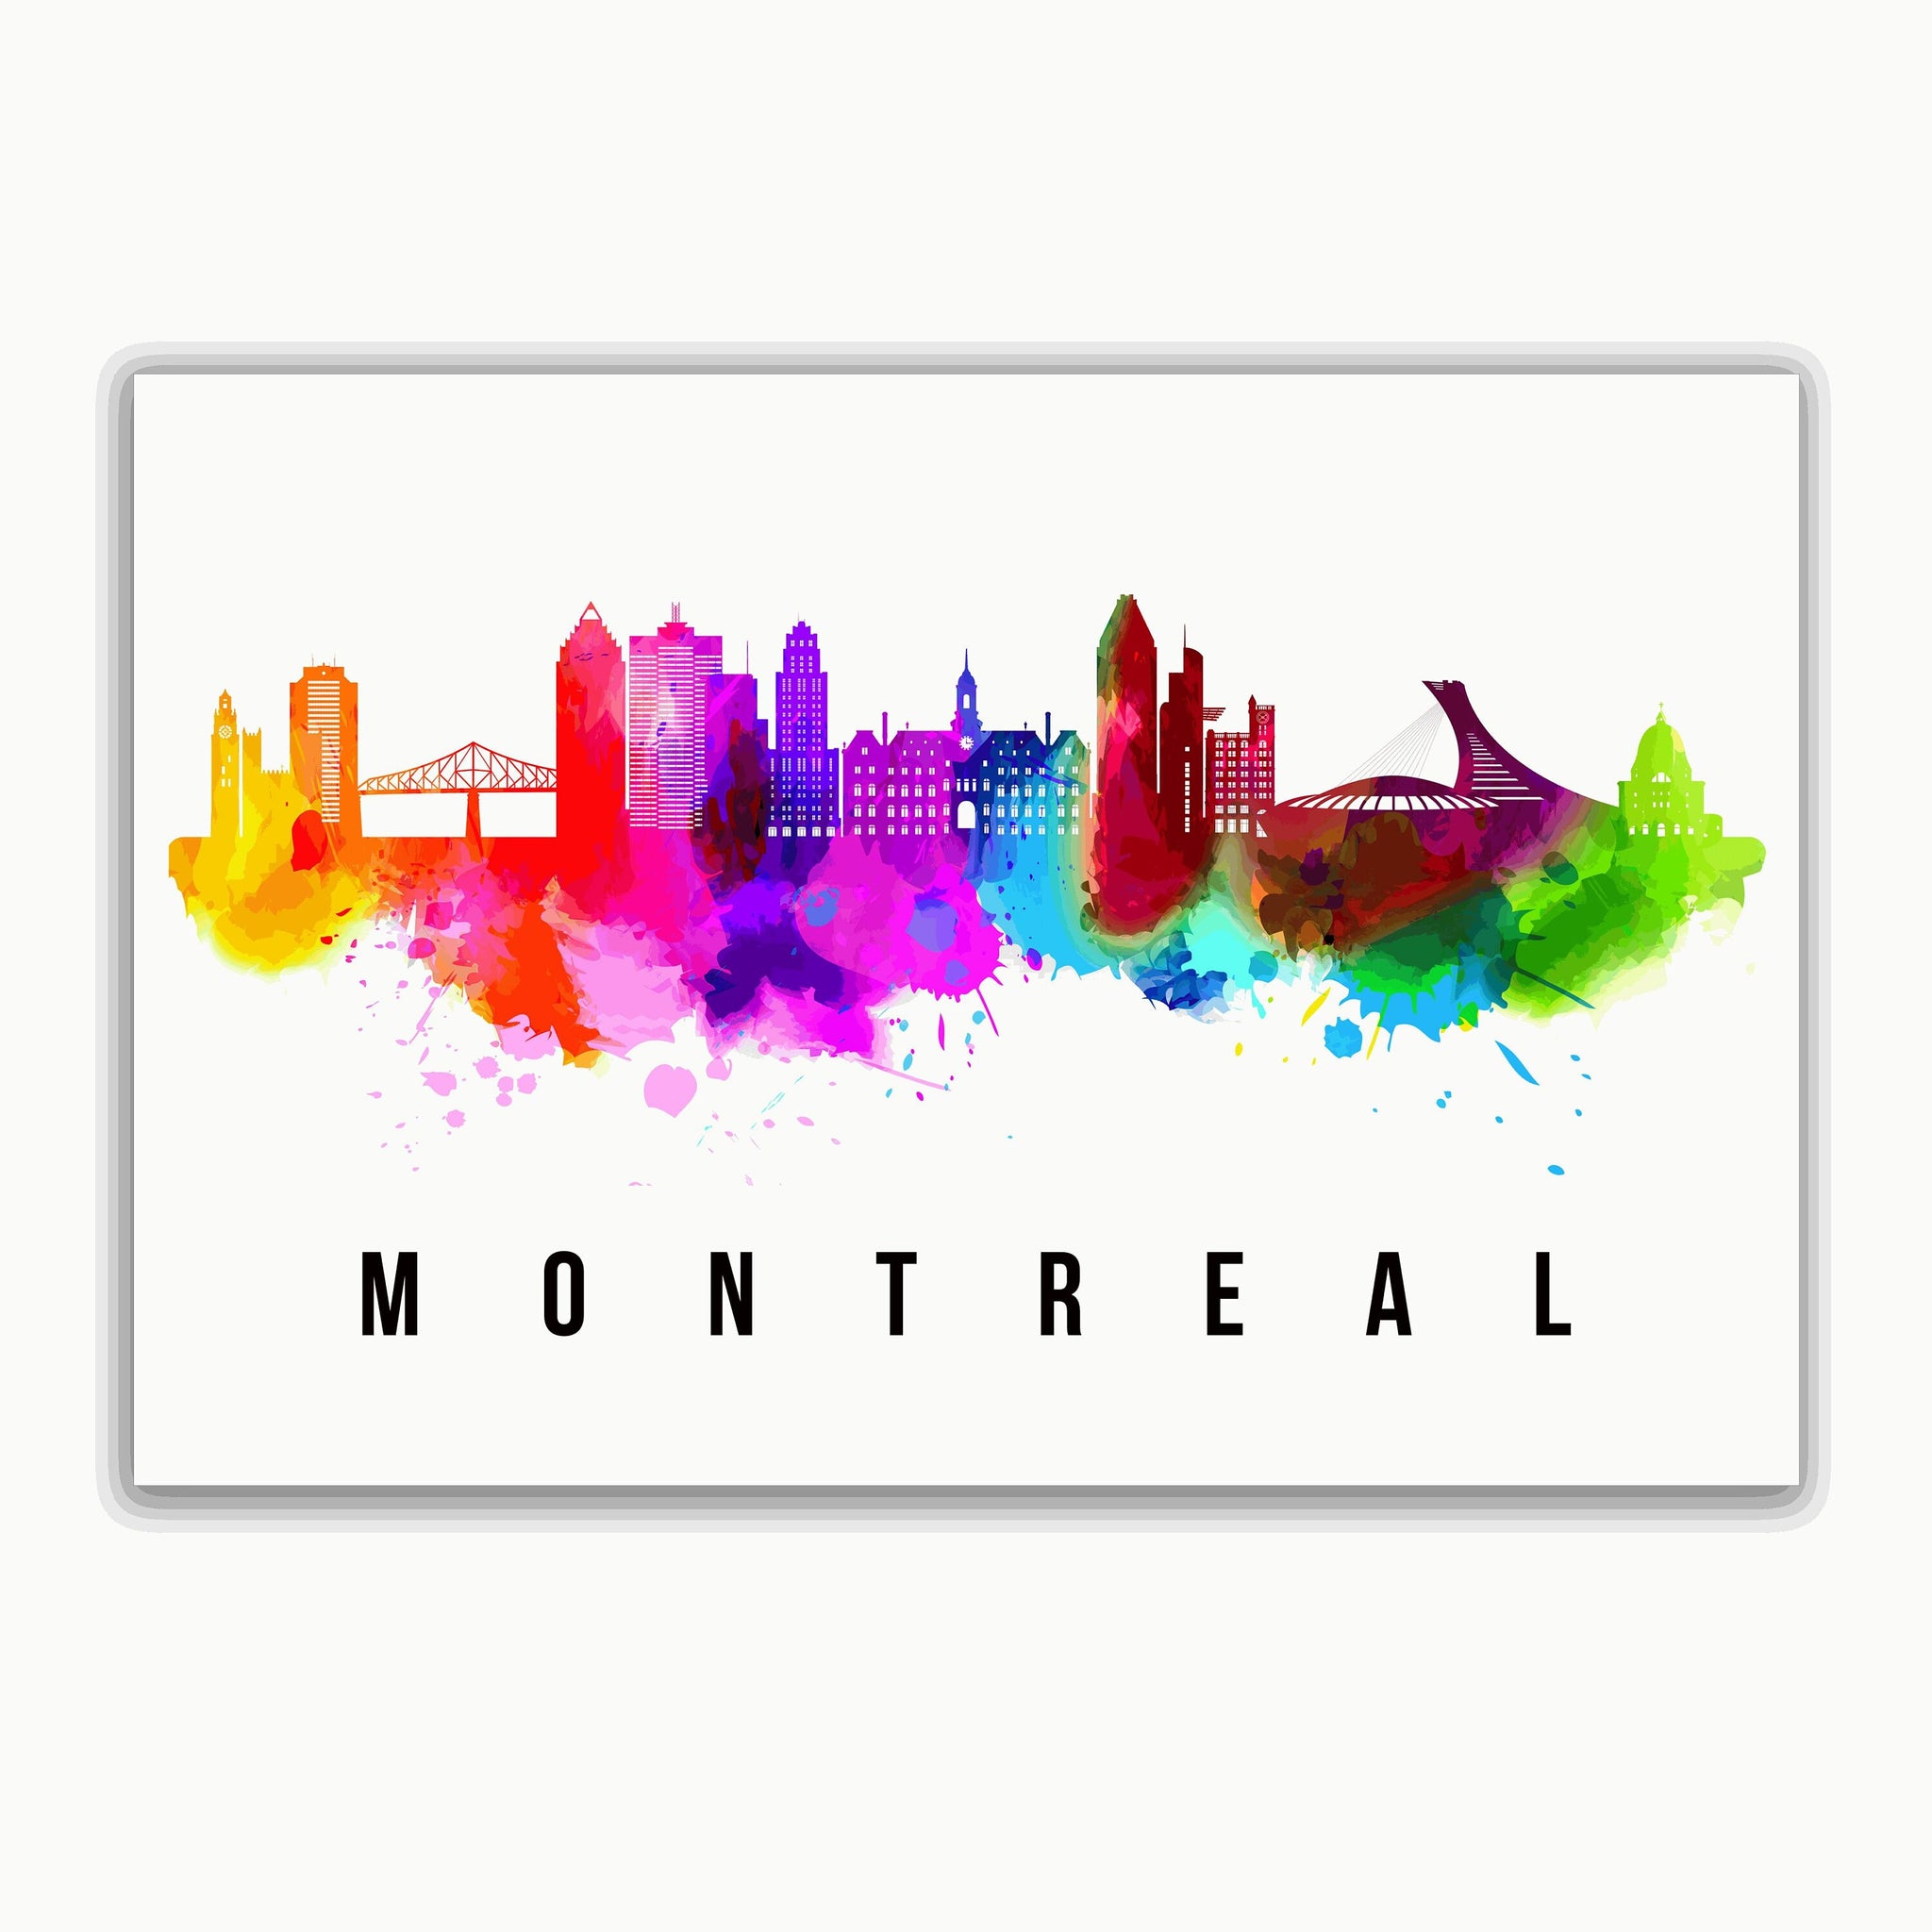 MONTREAL - CANADA Poster,  Skyline Poster Cityscape and Landmark Montreal Illustration Home Wall Art, Office Decor